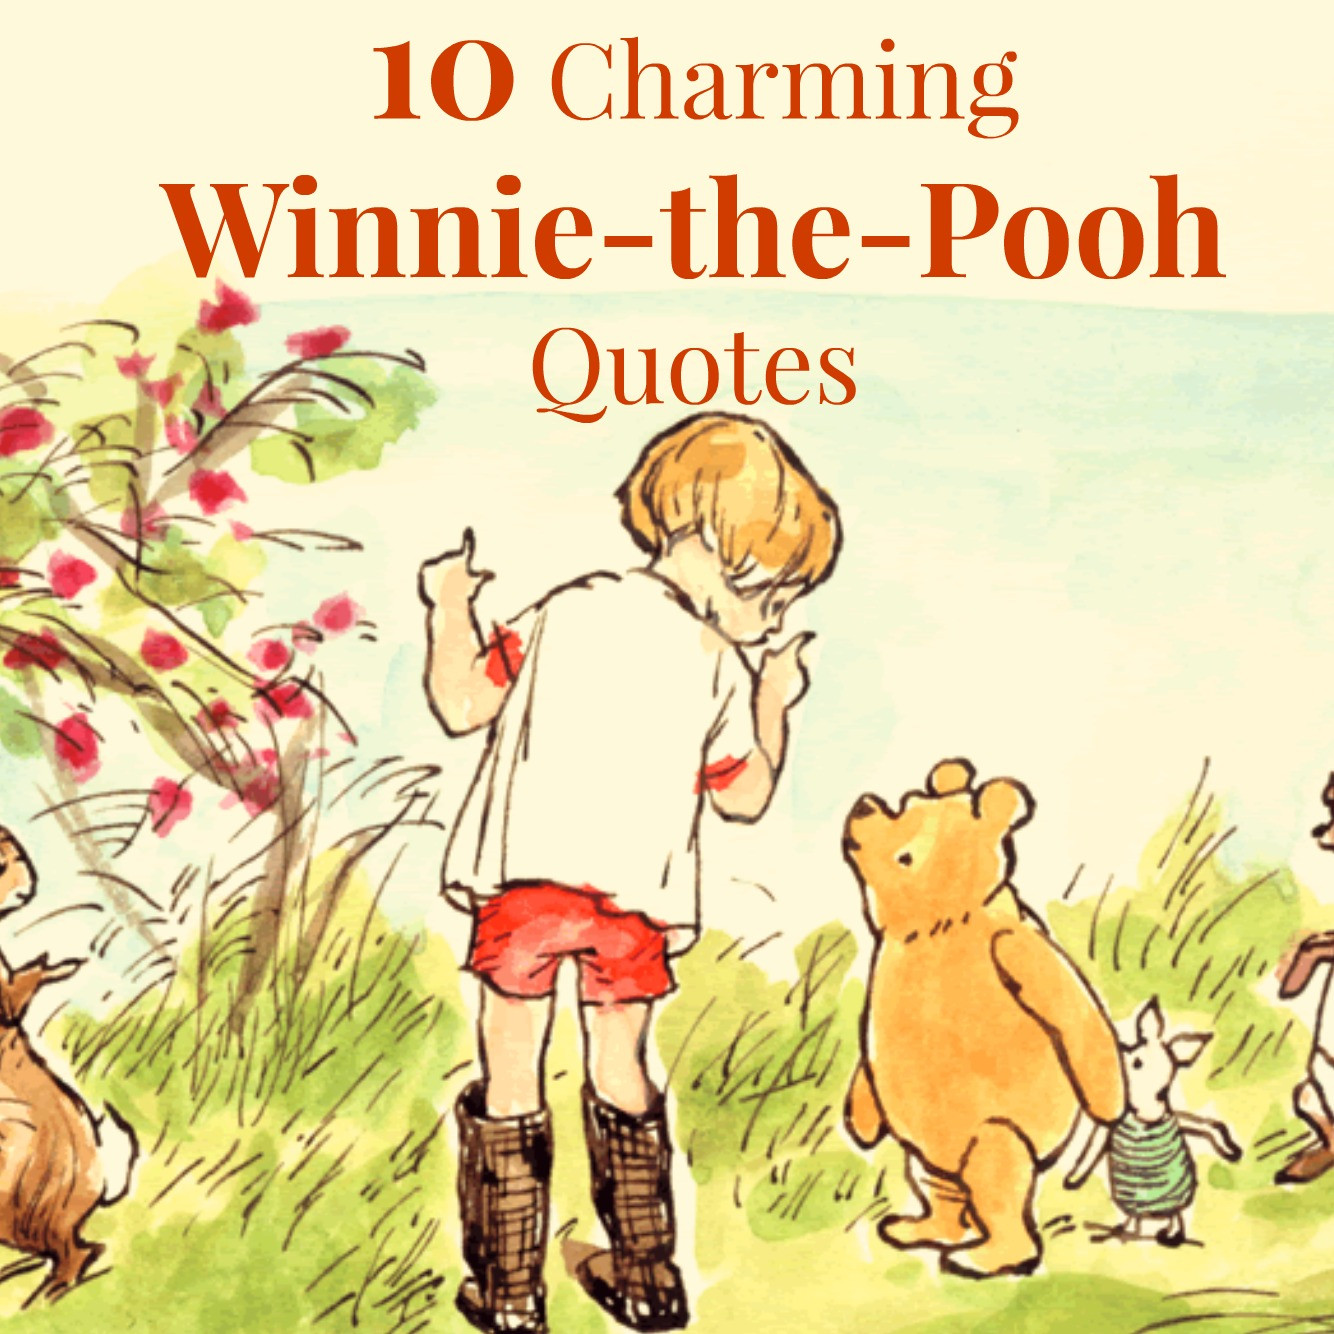 Winnie The Pooh Friendship Quotes
 Winnie The Pooh Quotes QuotesGram